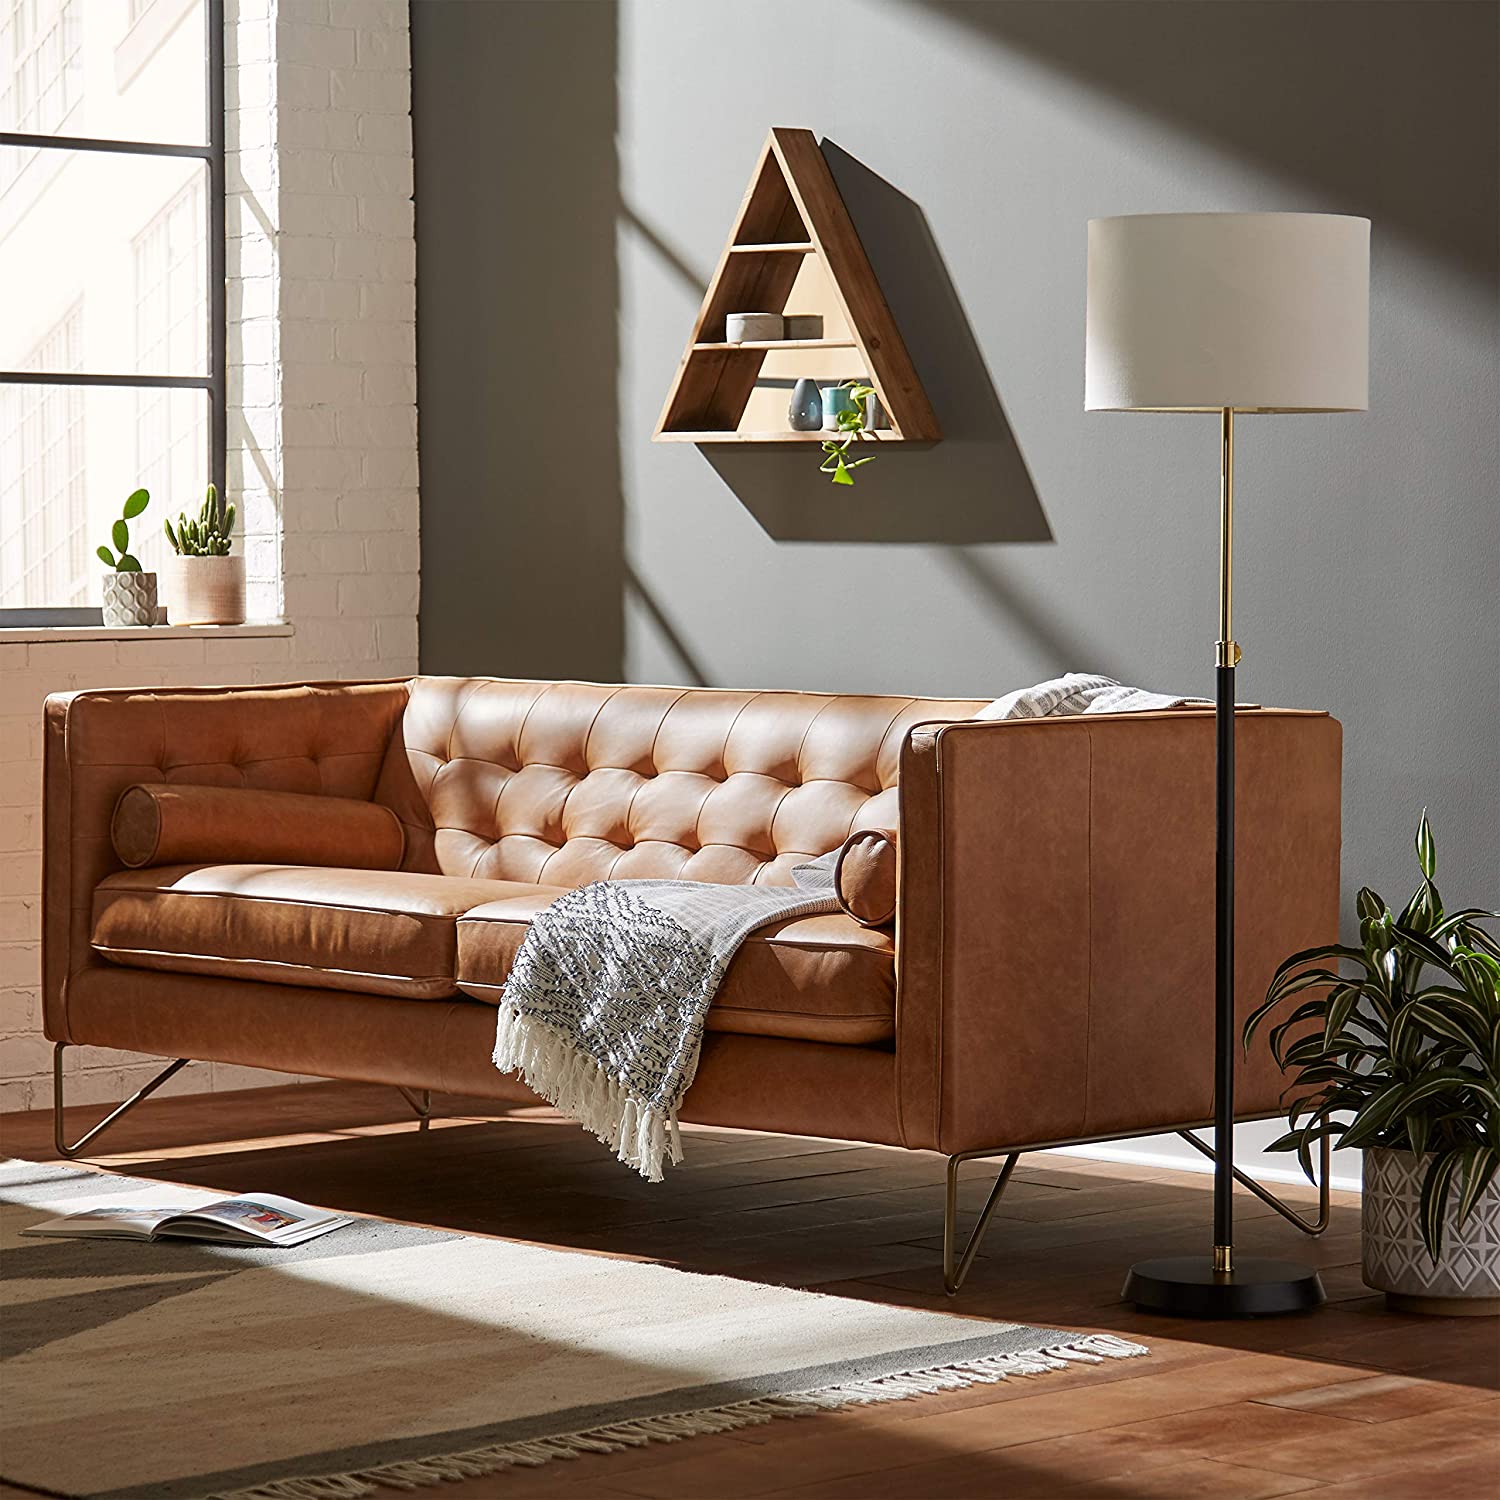  modern leather couch design inspiration